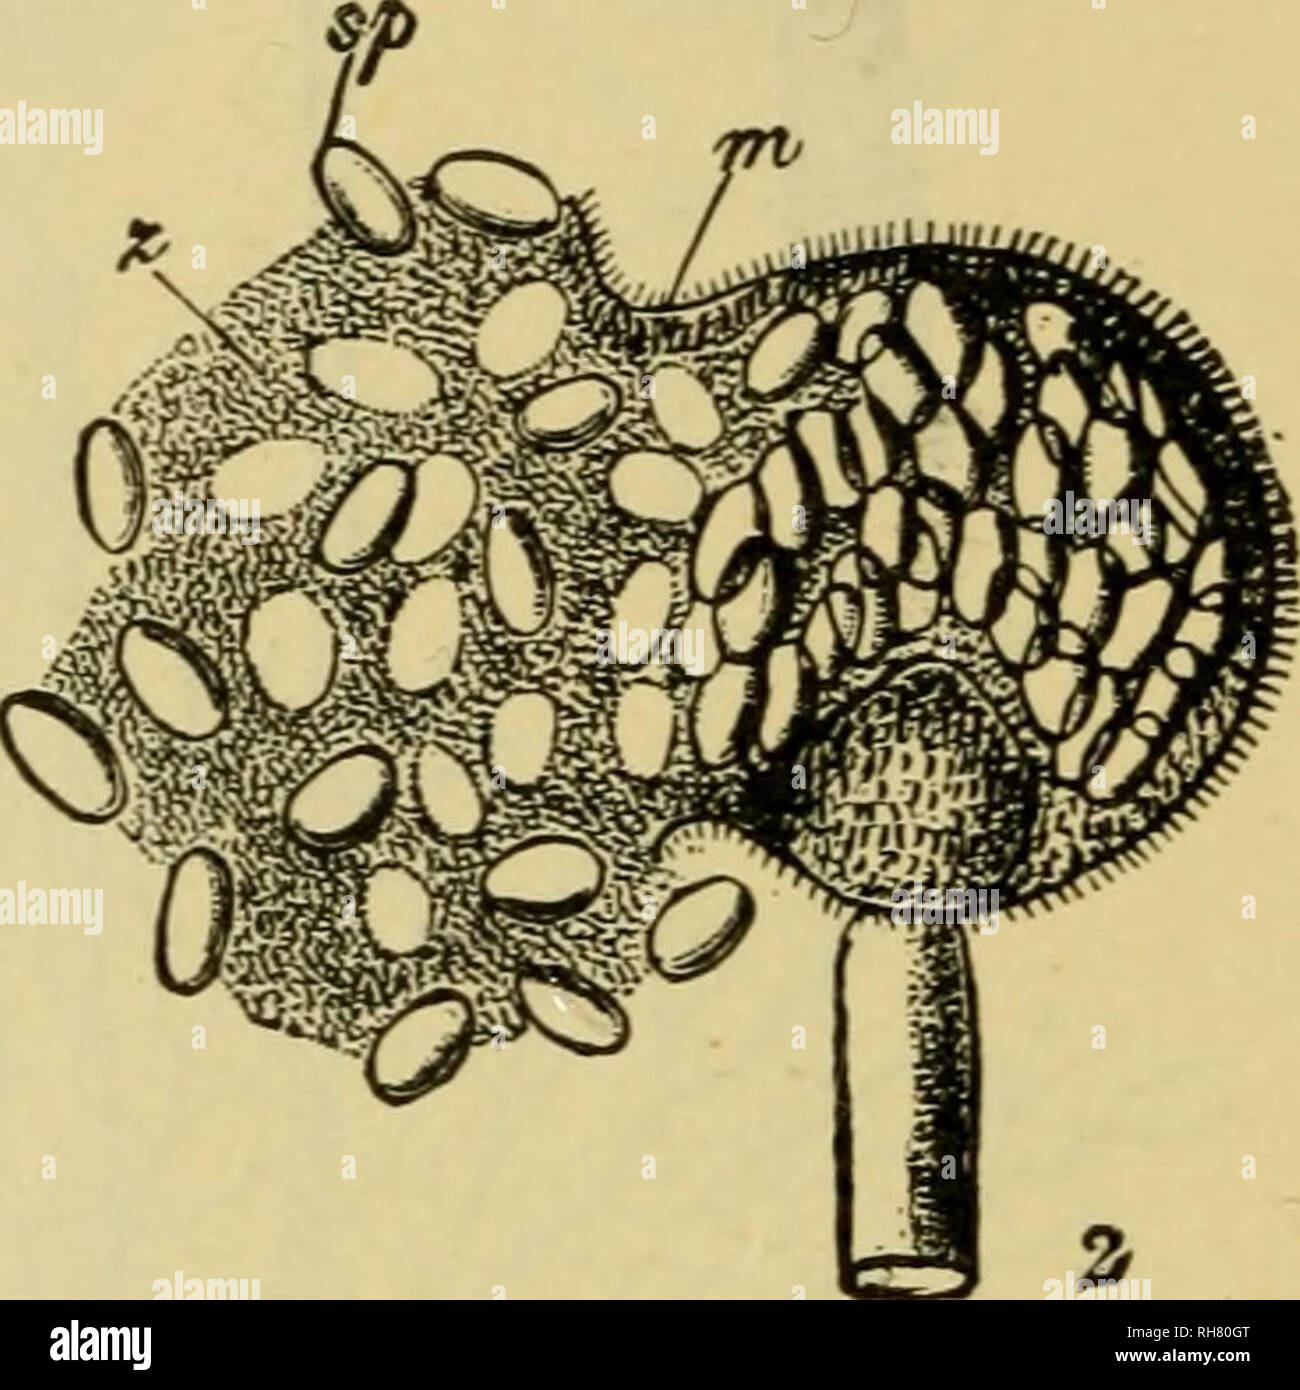 . Botany of the living plant. Botany; Plants. Fig. 313. I, Mucor Mucedo, a sporangium in optical longitudinal section, c = columella. »i=wall of sporangium. sp=spores. 2. Mucor mucilagineus, a sporangium shedding its spores ; the wall (w) is ruptured, and the mucilaginous matrix (z) is greatly swollen. (After Brefeld, 1 x 225 ; 2 x 300, after v. Tavel.) (From Strasburger.) in a mucilaginous matrix, while centrally is a large columella (Fig. 313, 1). It is difficult to see this structure satisfactorily in ripe sporangia mounted in water, owing to the swelling of the mucilaginous matrix, which b Stock Photo